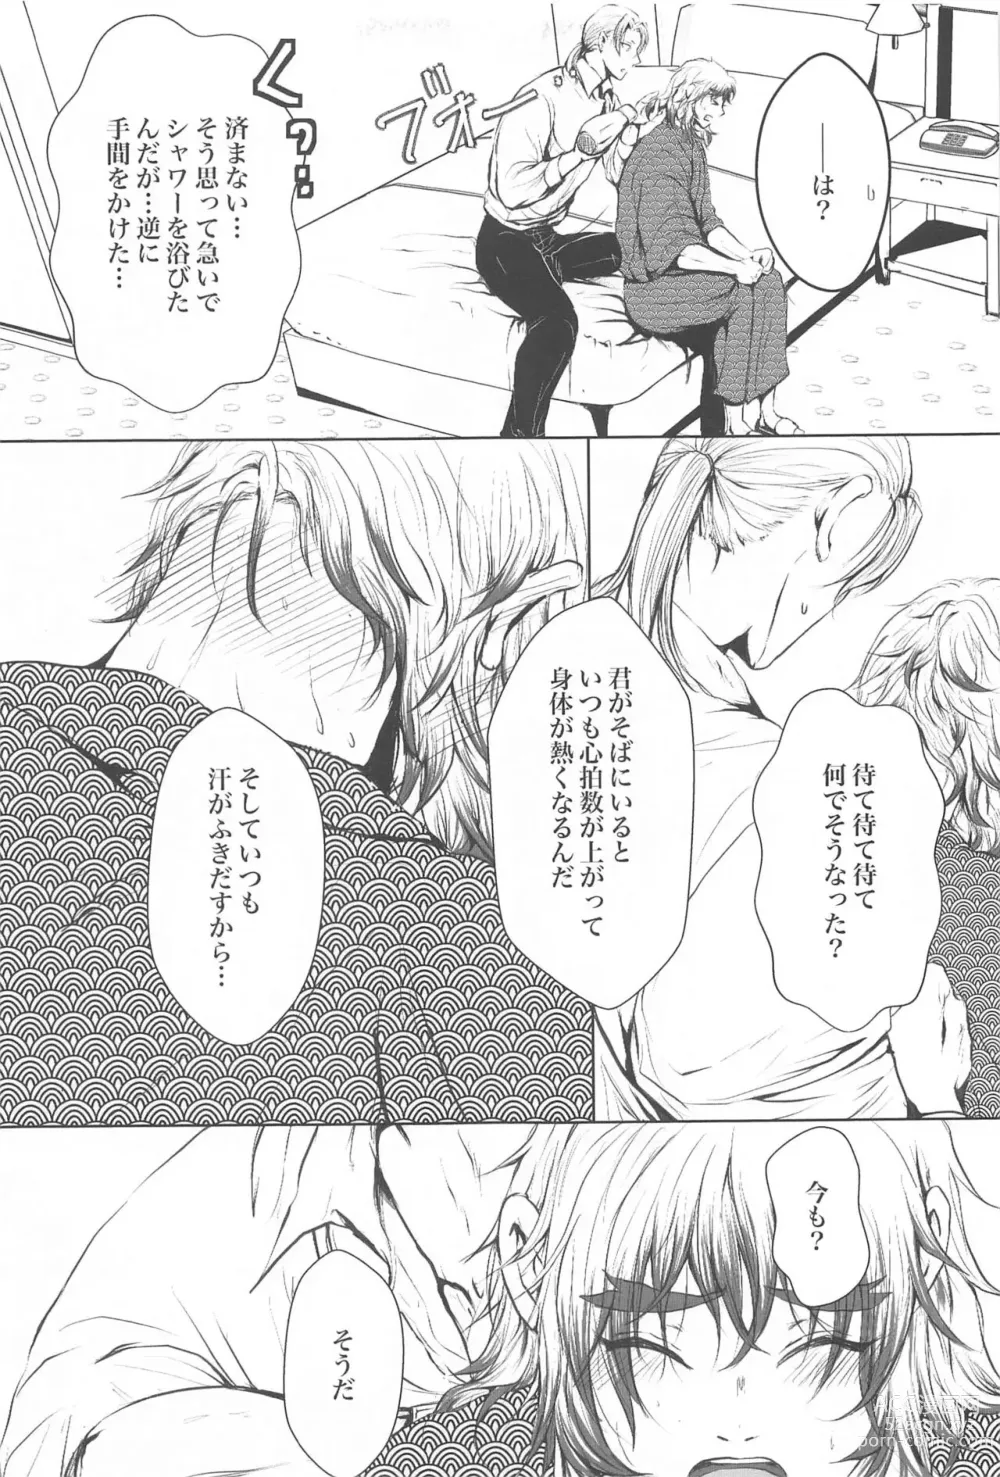 Page 6 of doujinshi Unsafe x Red amber